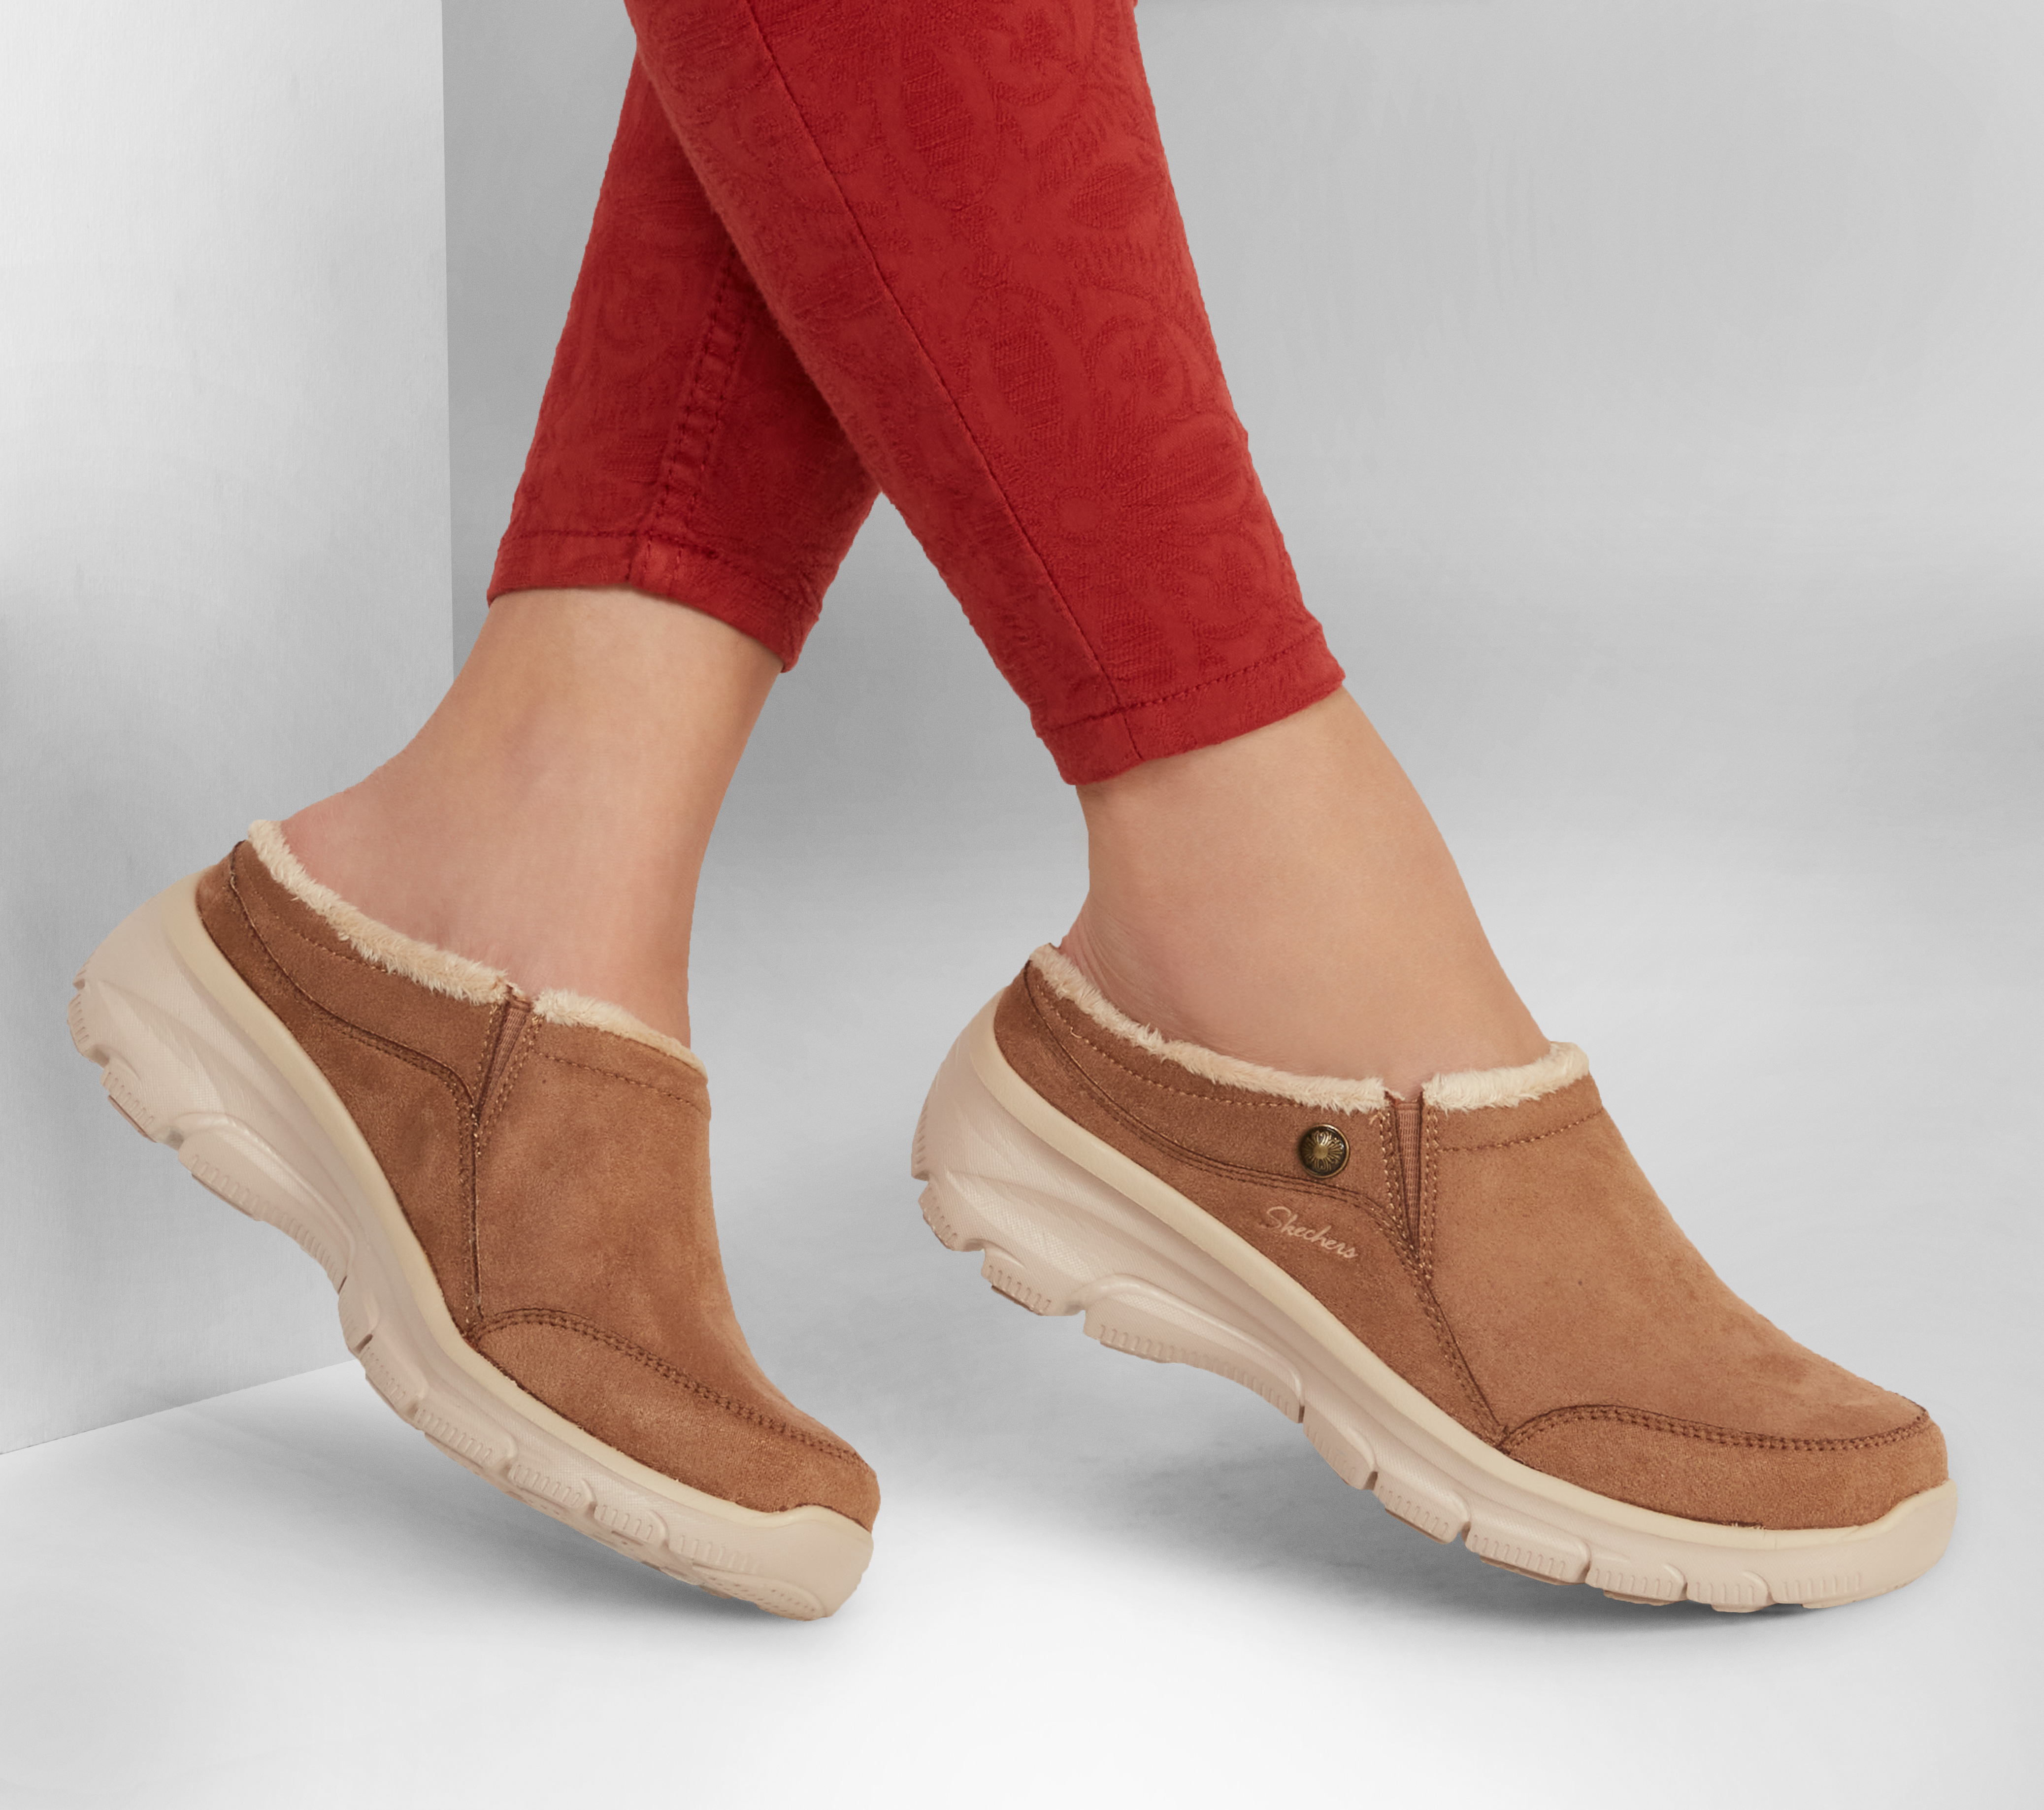 Skechers Women's Relaxed Fit Easy Going Latte Clog Tan 8